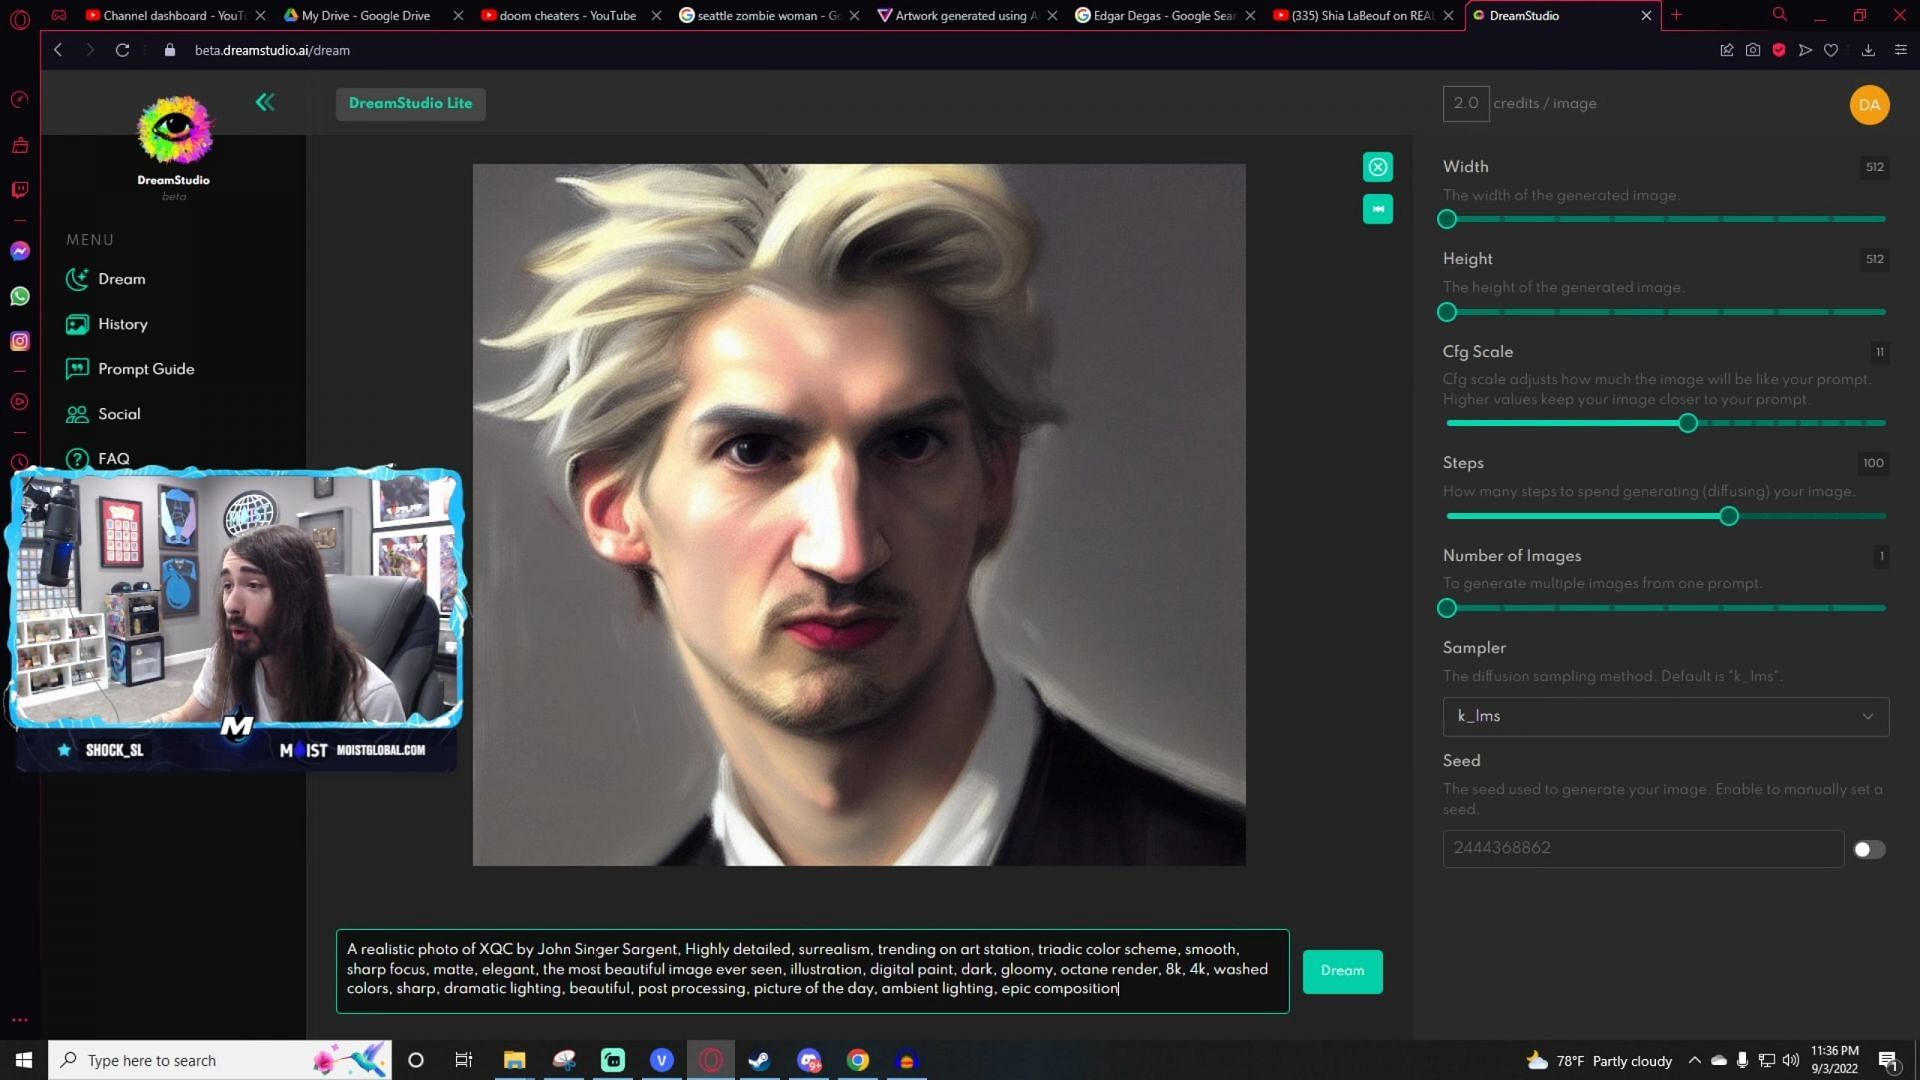 Twitch streamer exclaims after seeing an xQc artwork generated by the AI (Image via MoistCr1TiKaL/Twitch)